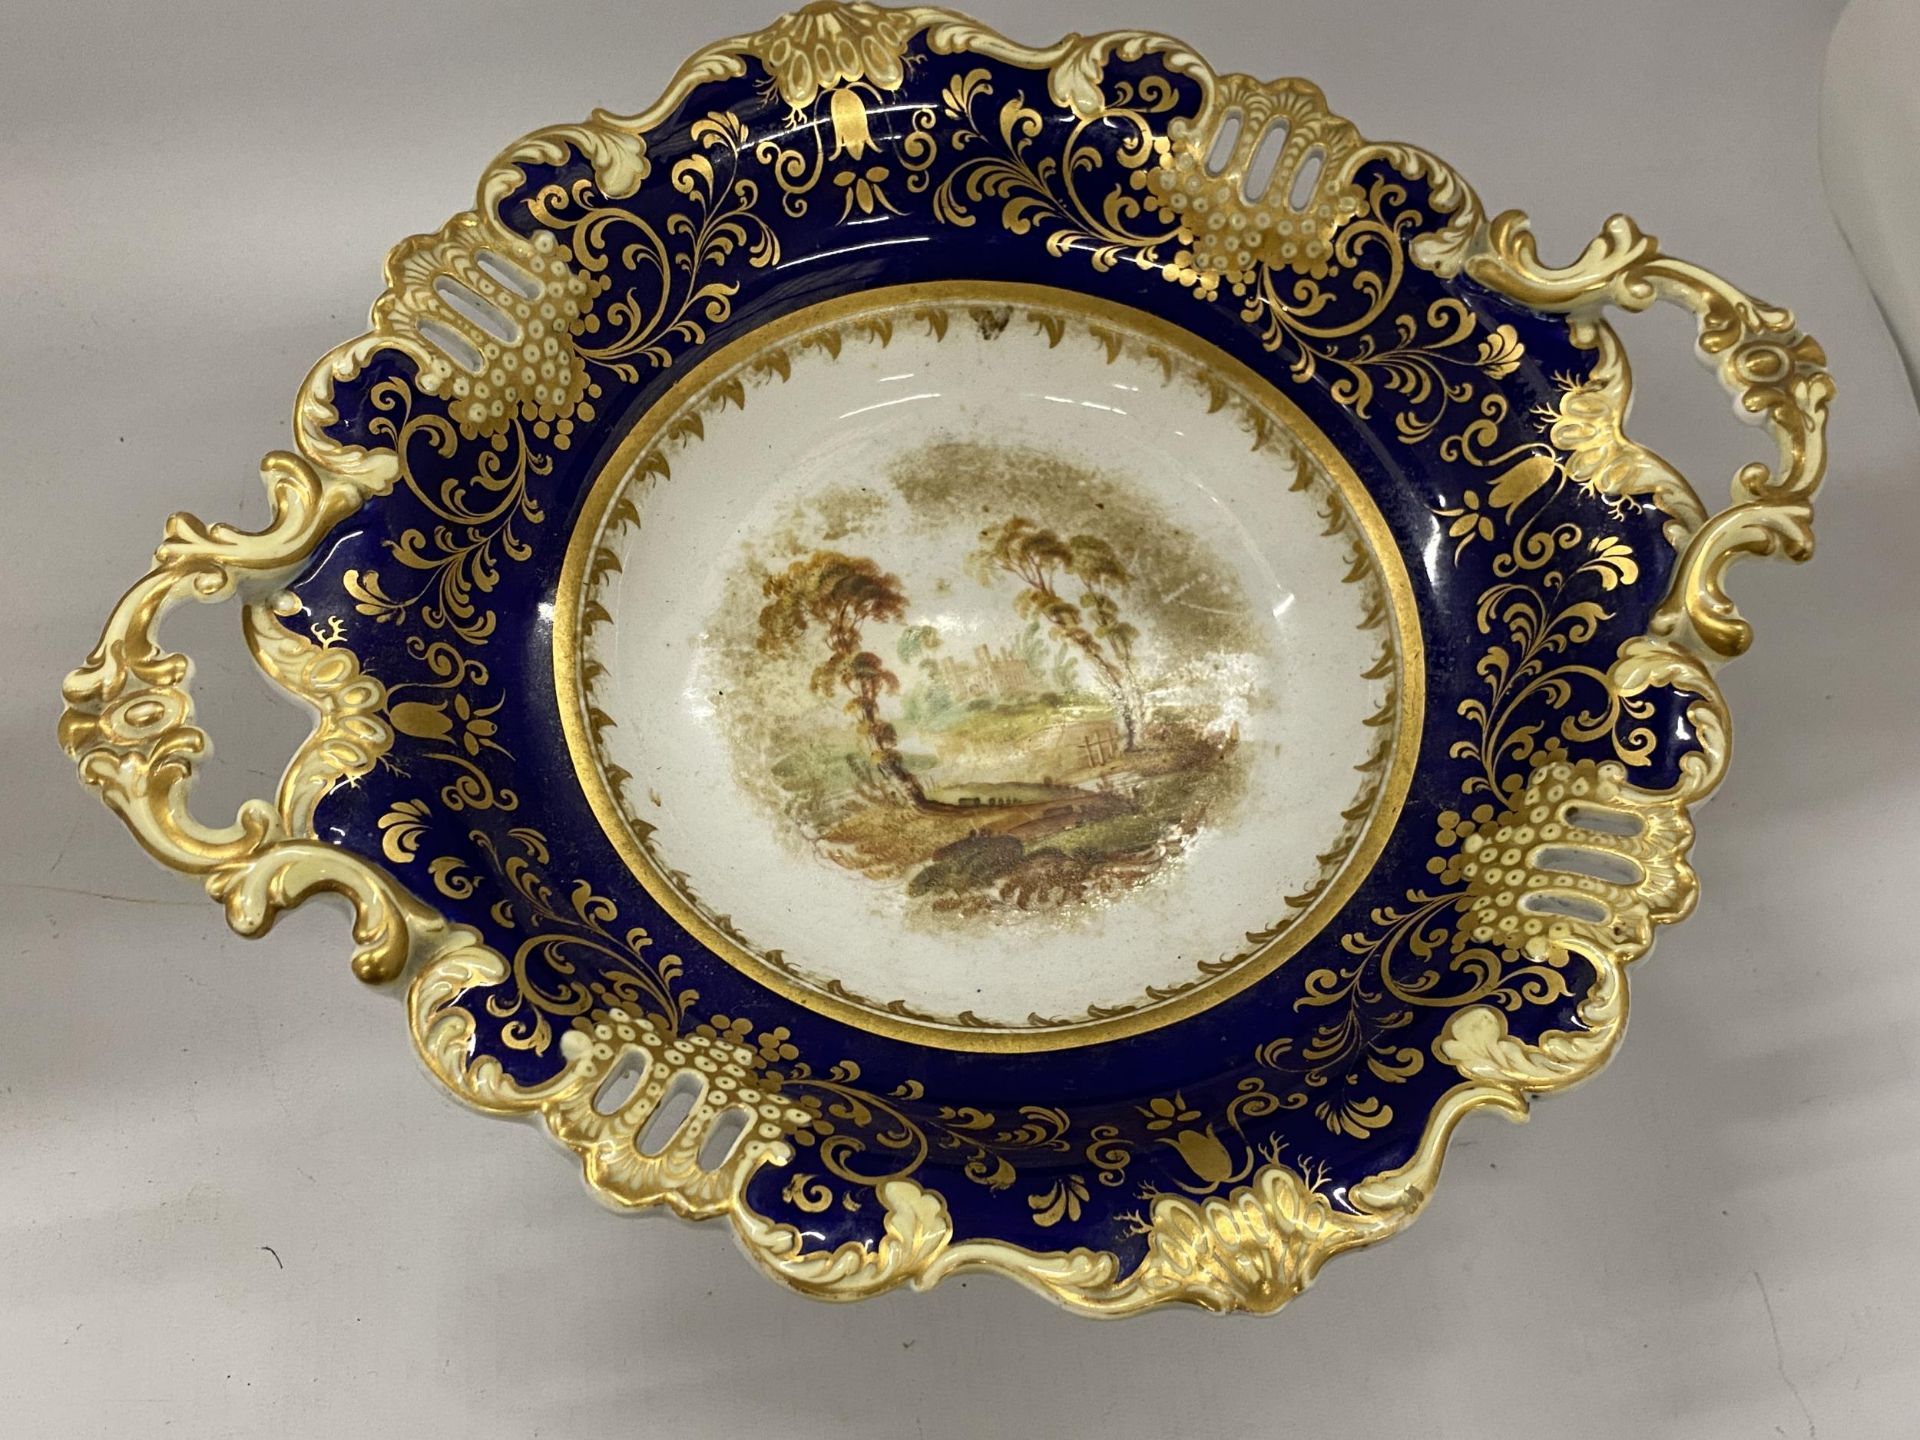 A VICTORIAN FOOTED COMPORT WITH COBALT BLUE, GOLD FILIGREE AND TRANSFER PRINTED SCENE, HEIGHT 17CM - Image 2 of 4